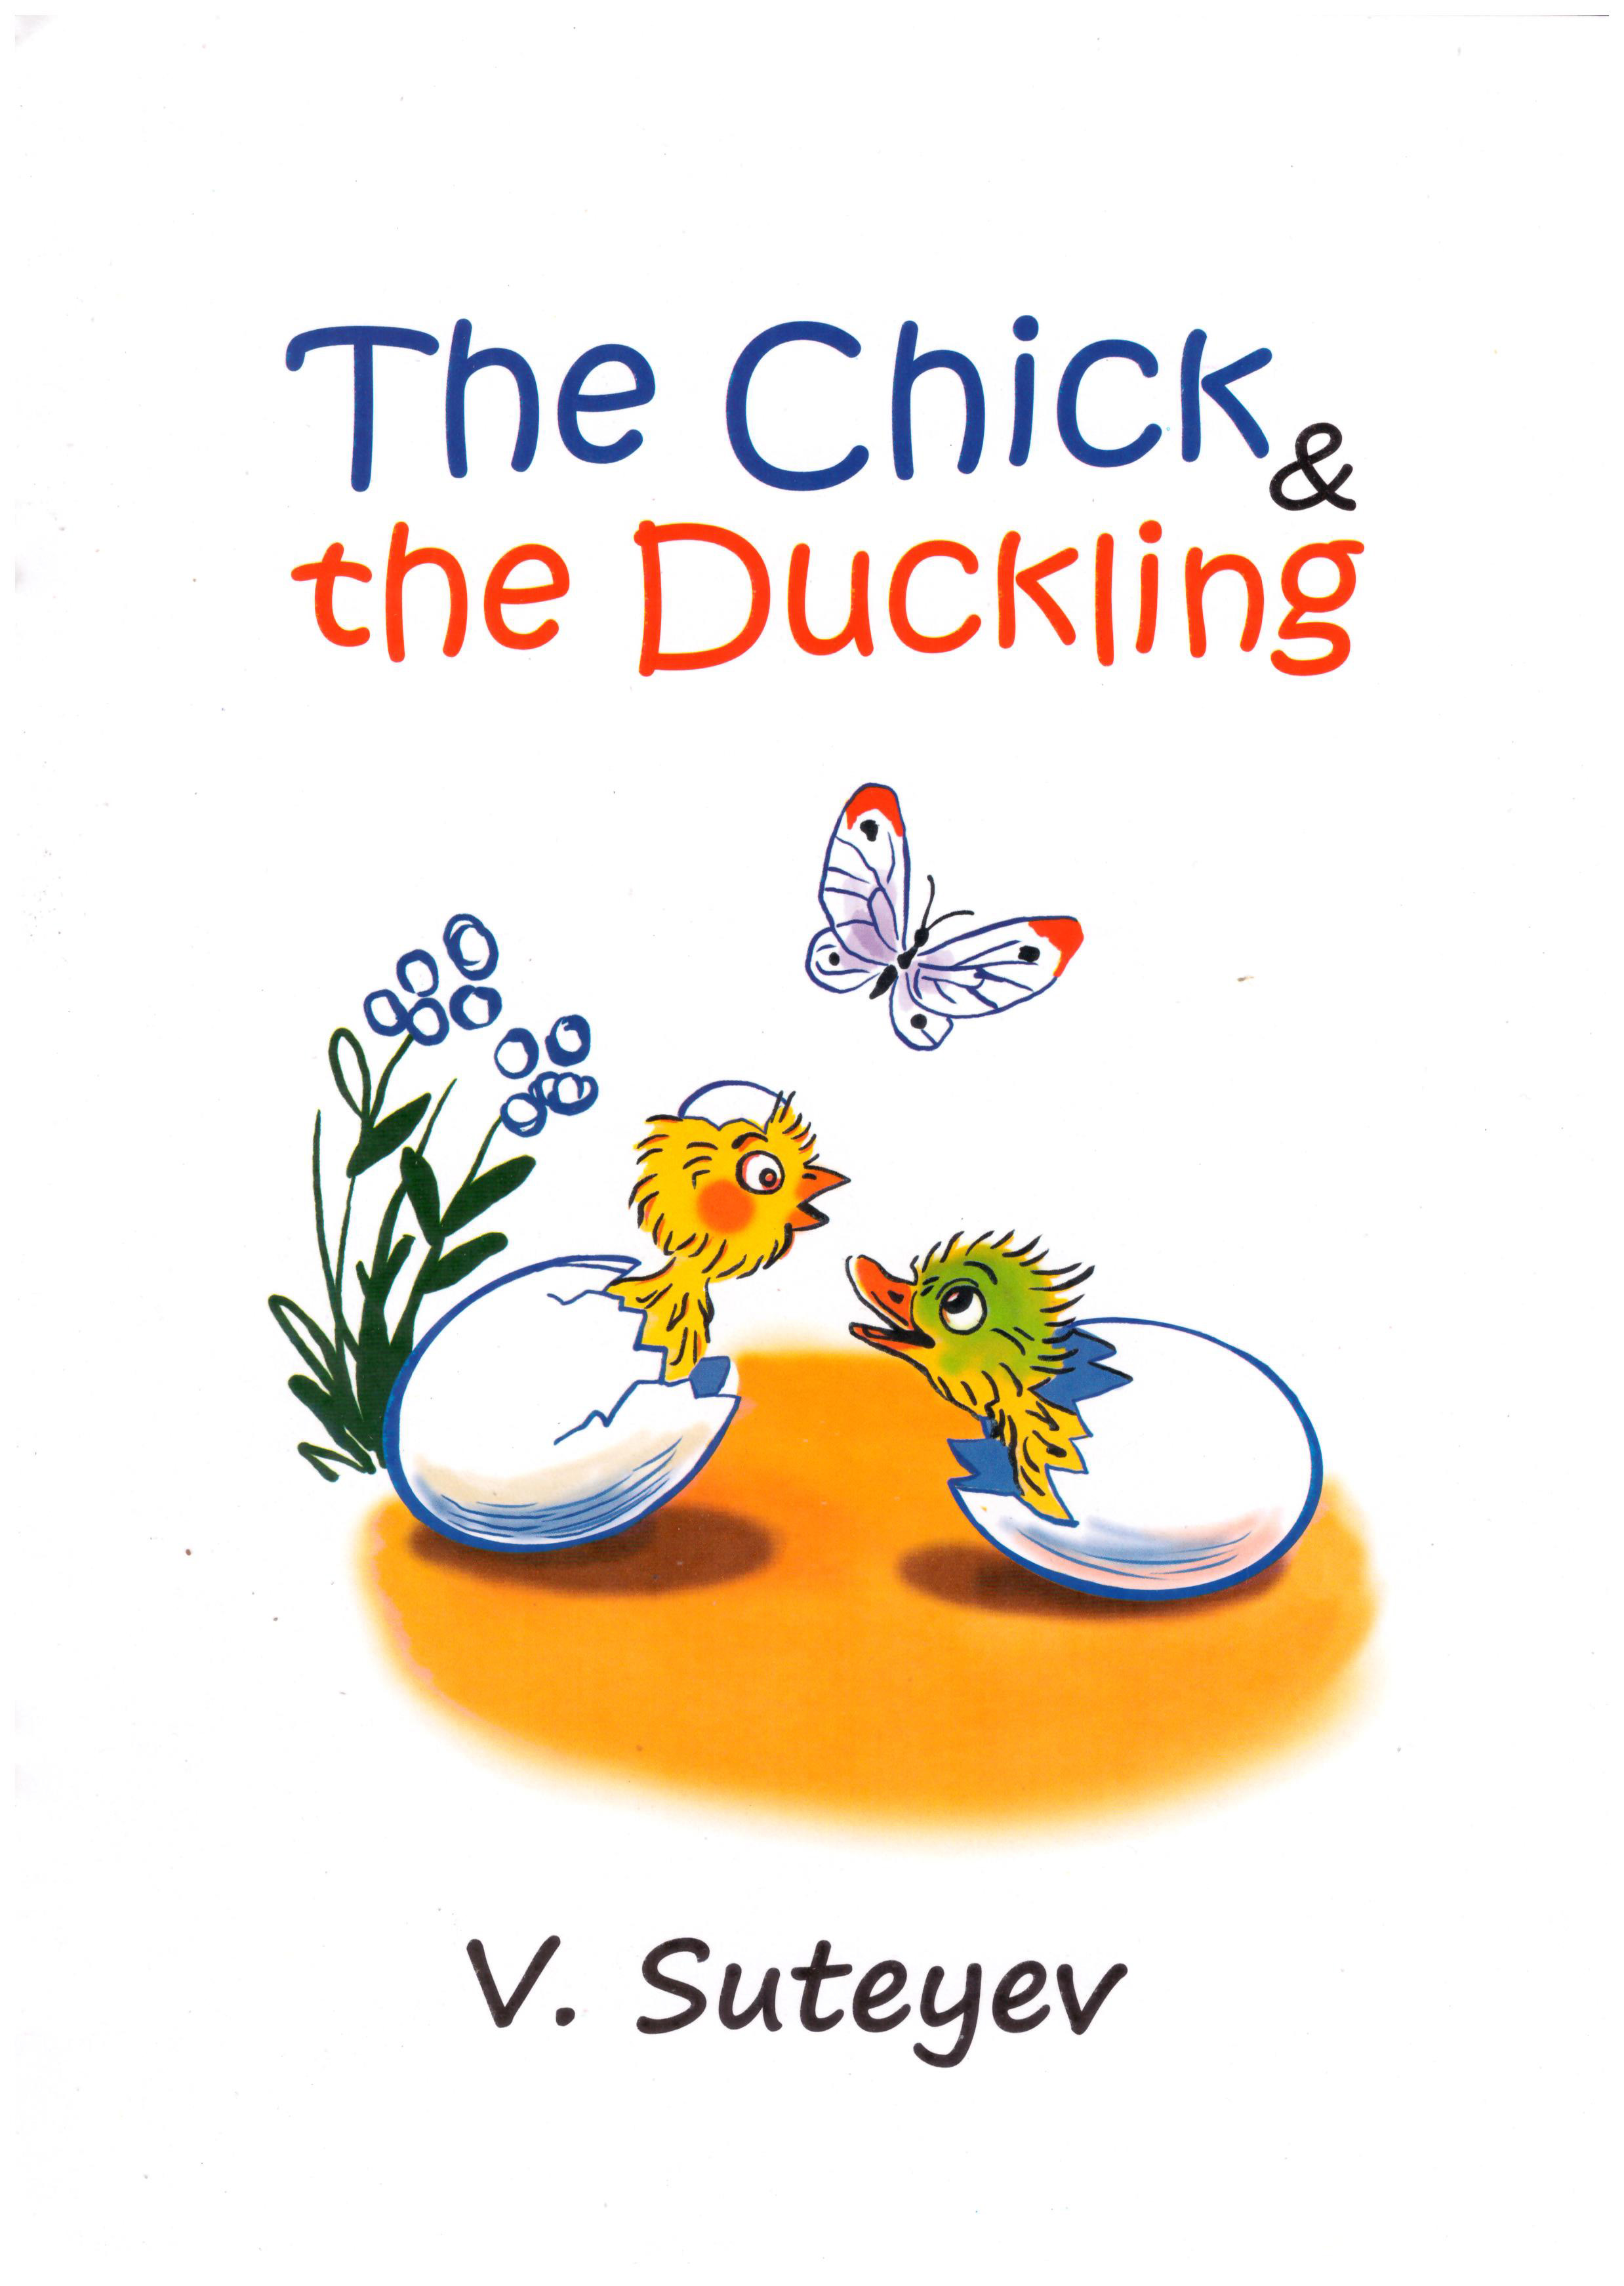 The Chick and The Duckling